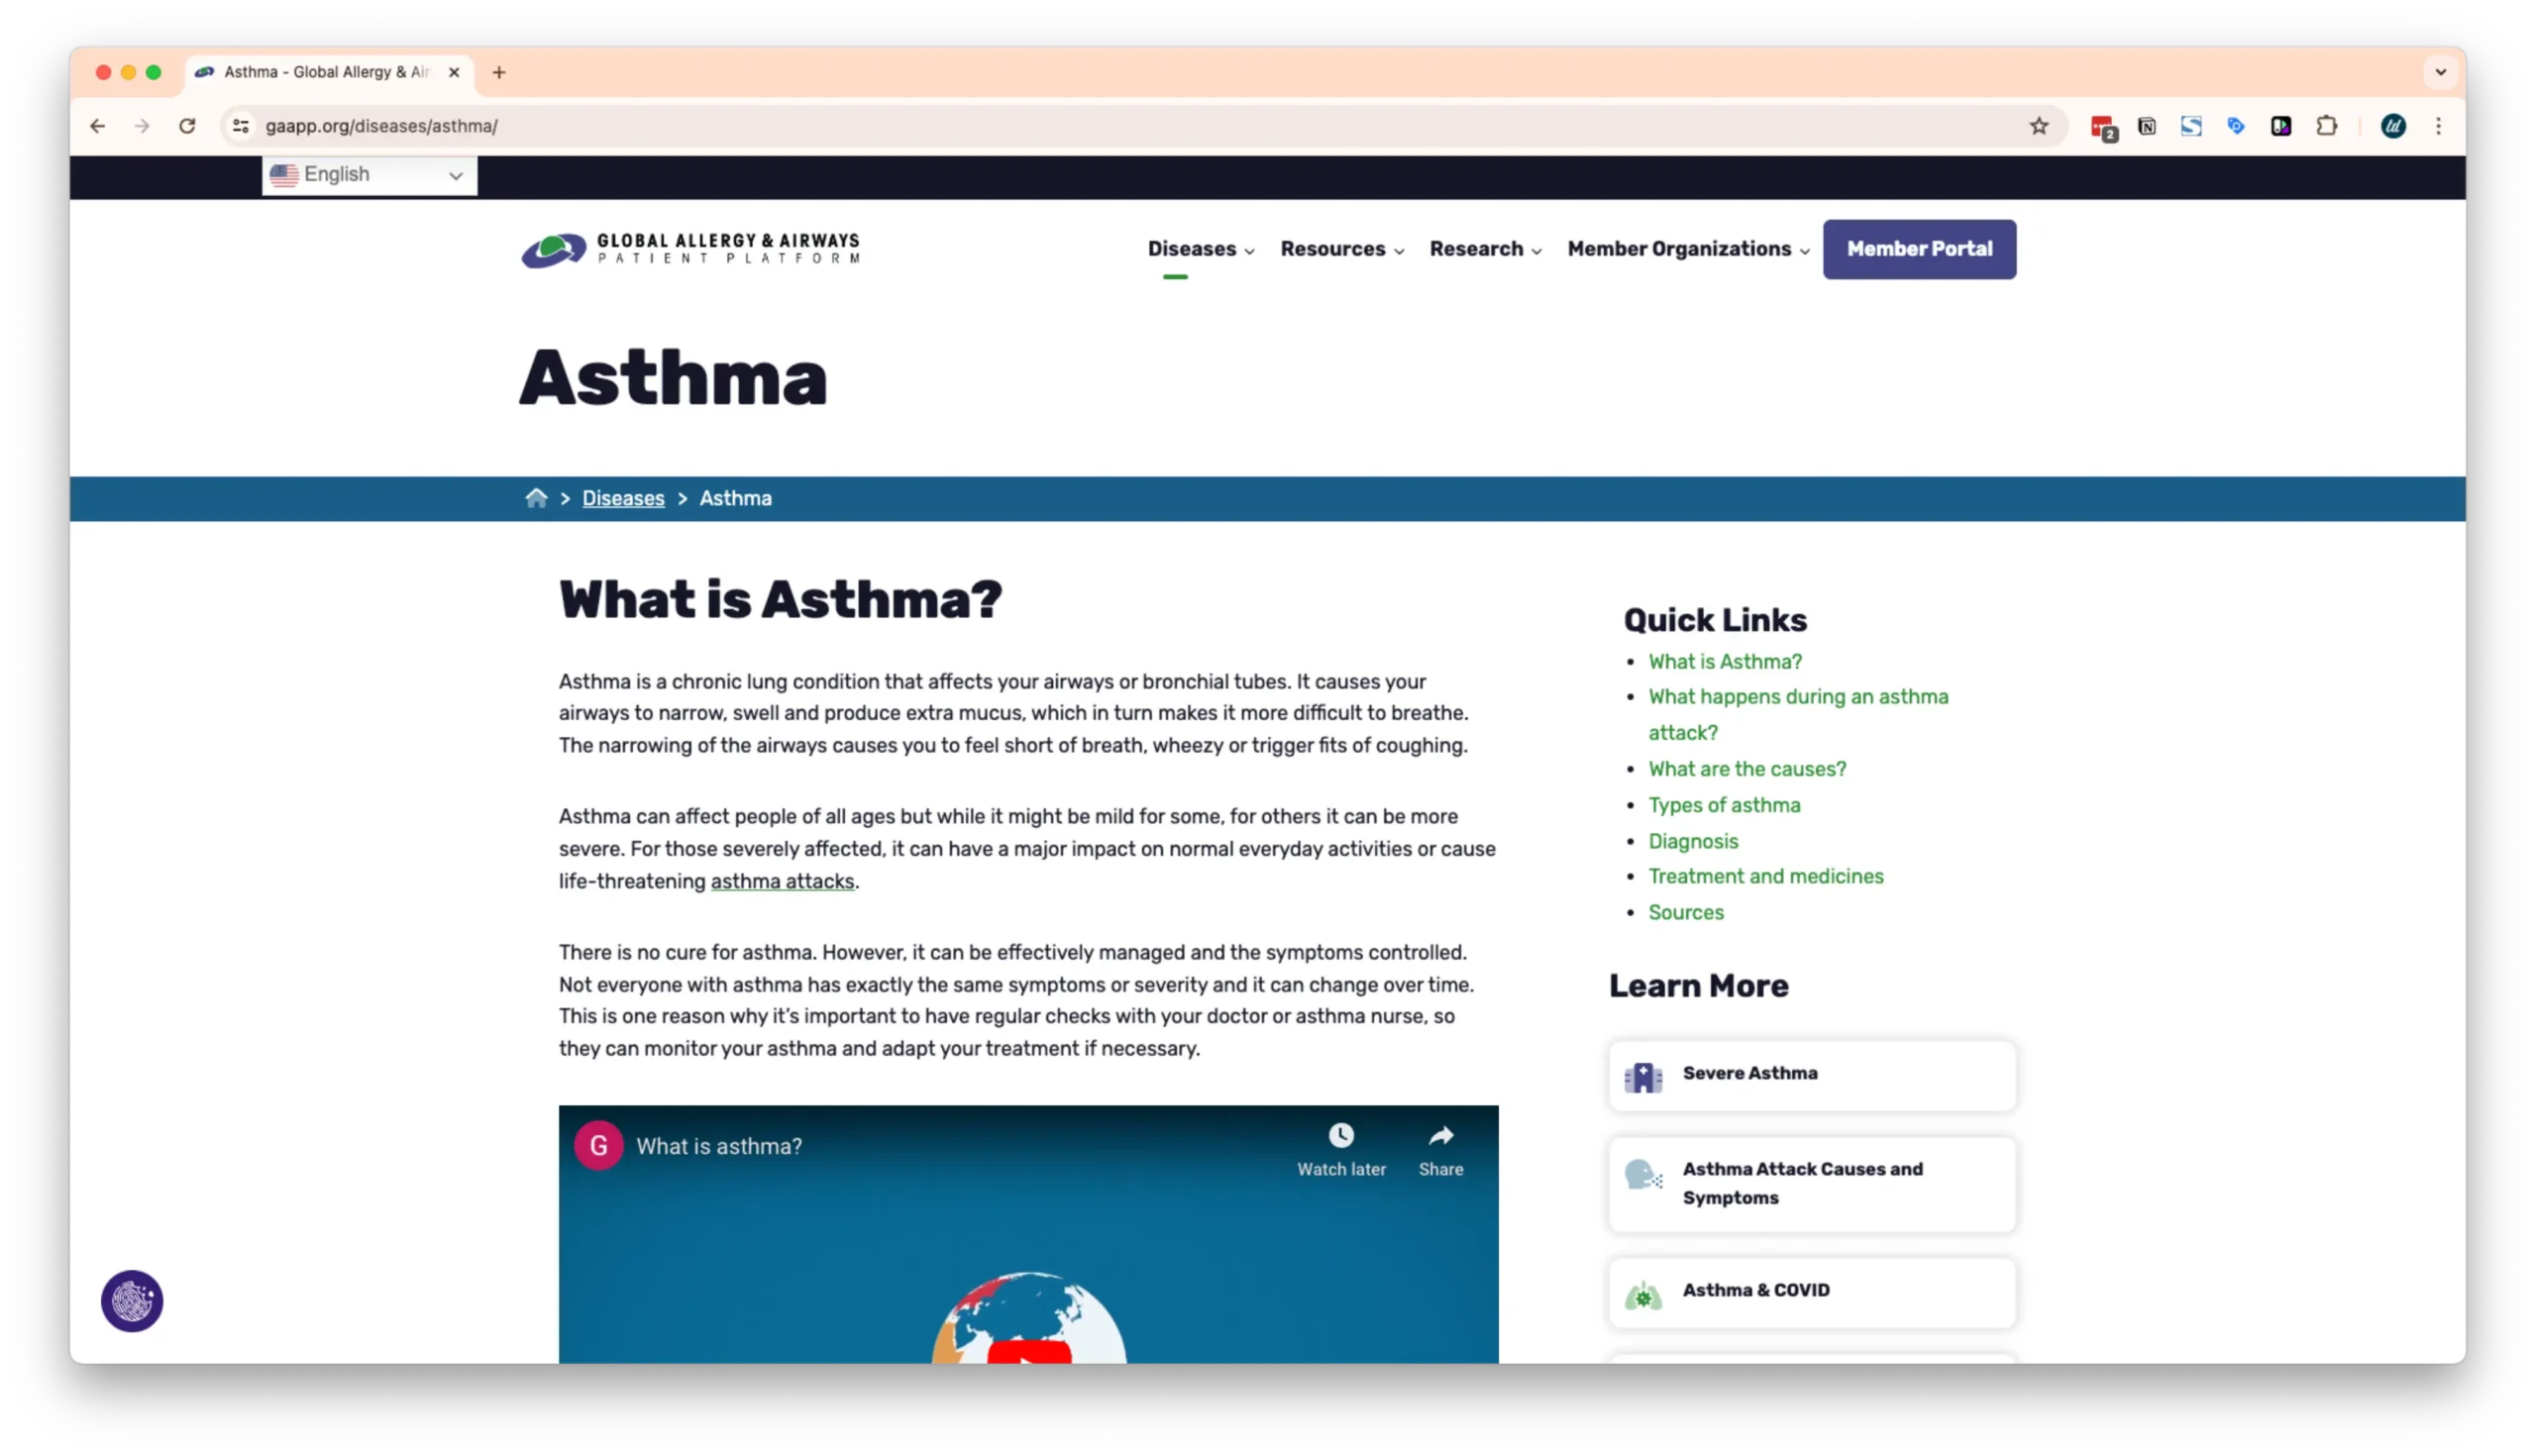 A webpage from the Global Allergy & Airways Patient Platform detailing asthma. It includes a description of asthma, quick links for related information, and a "Learn More" section with additional resources. A video titled "What is asthma?" is embedded.